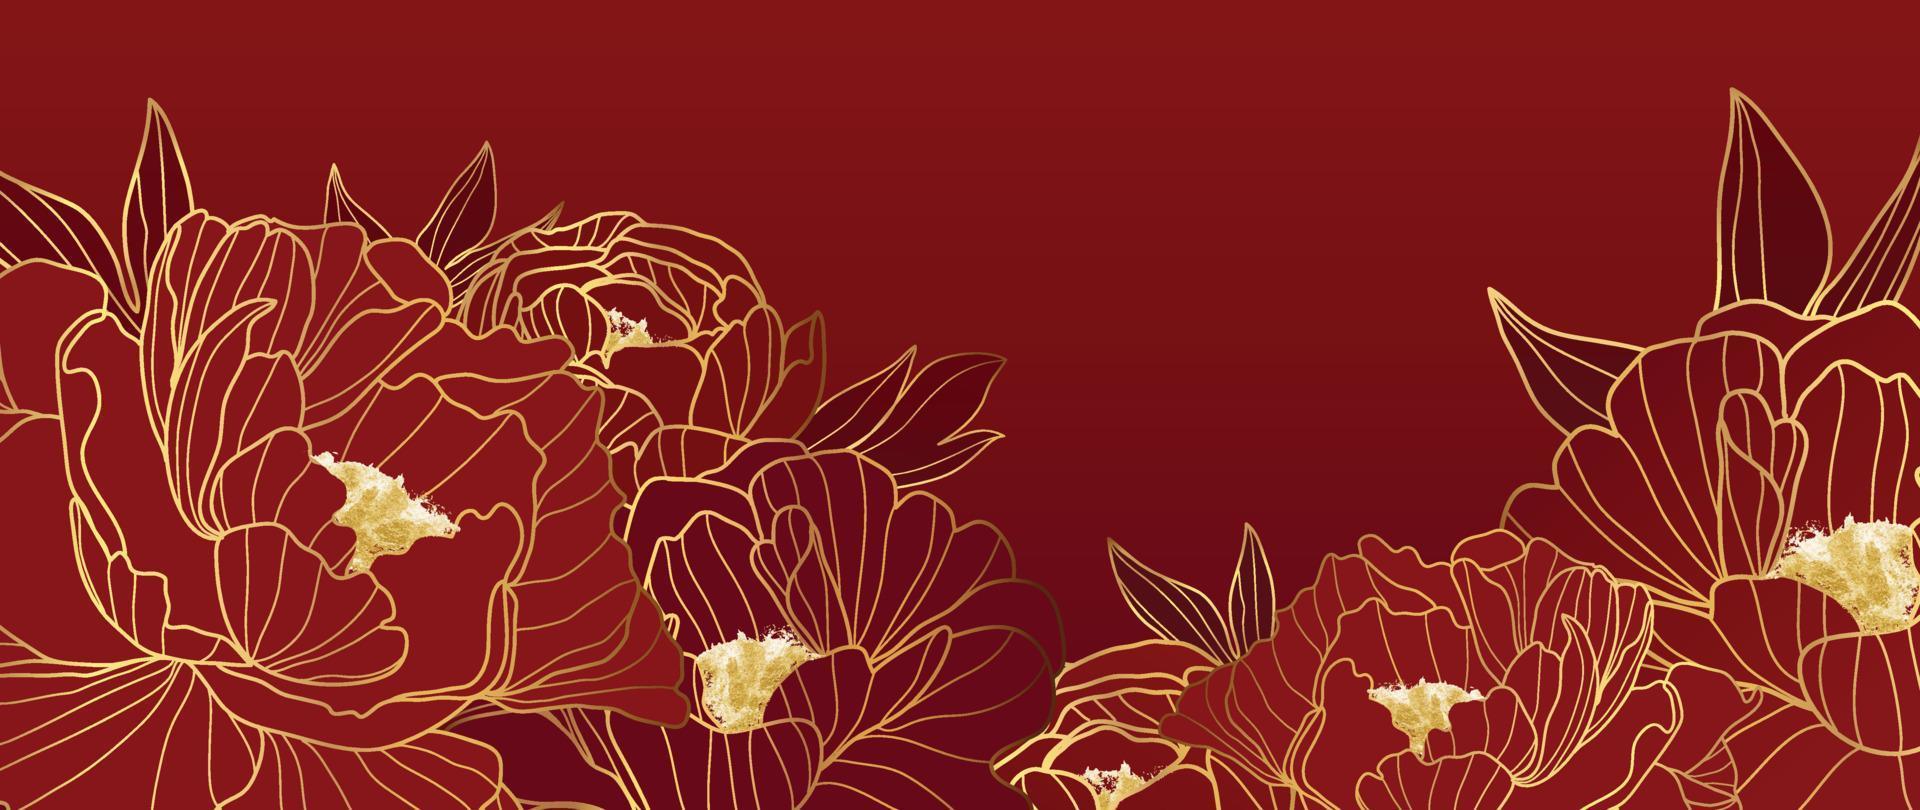 Happy Chinese new year luxury style pattern background vector. Oriental peony flower gold line art texture on red background. Design illustration for wallpaper, card, poster, packaging, advertising. vector